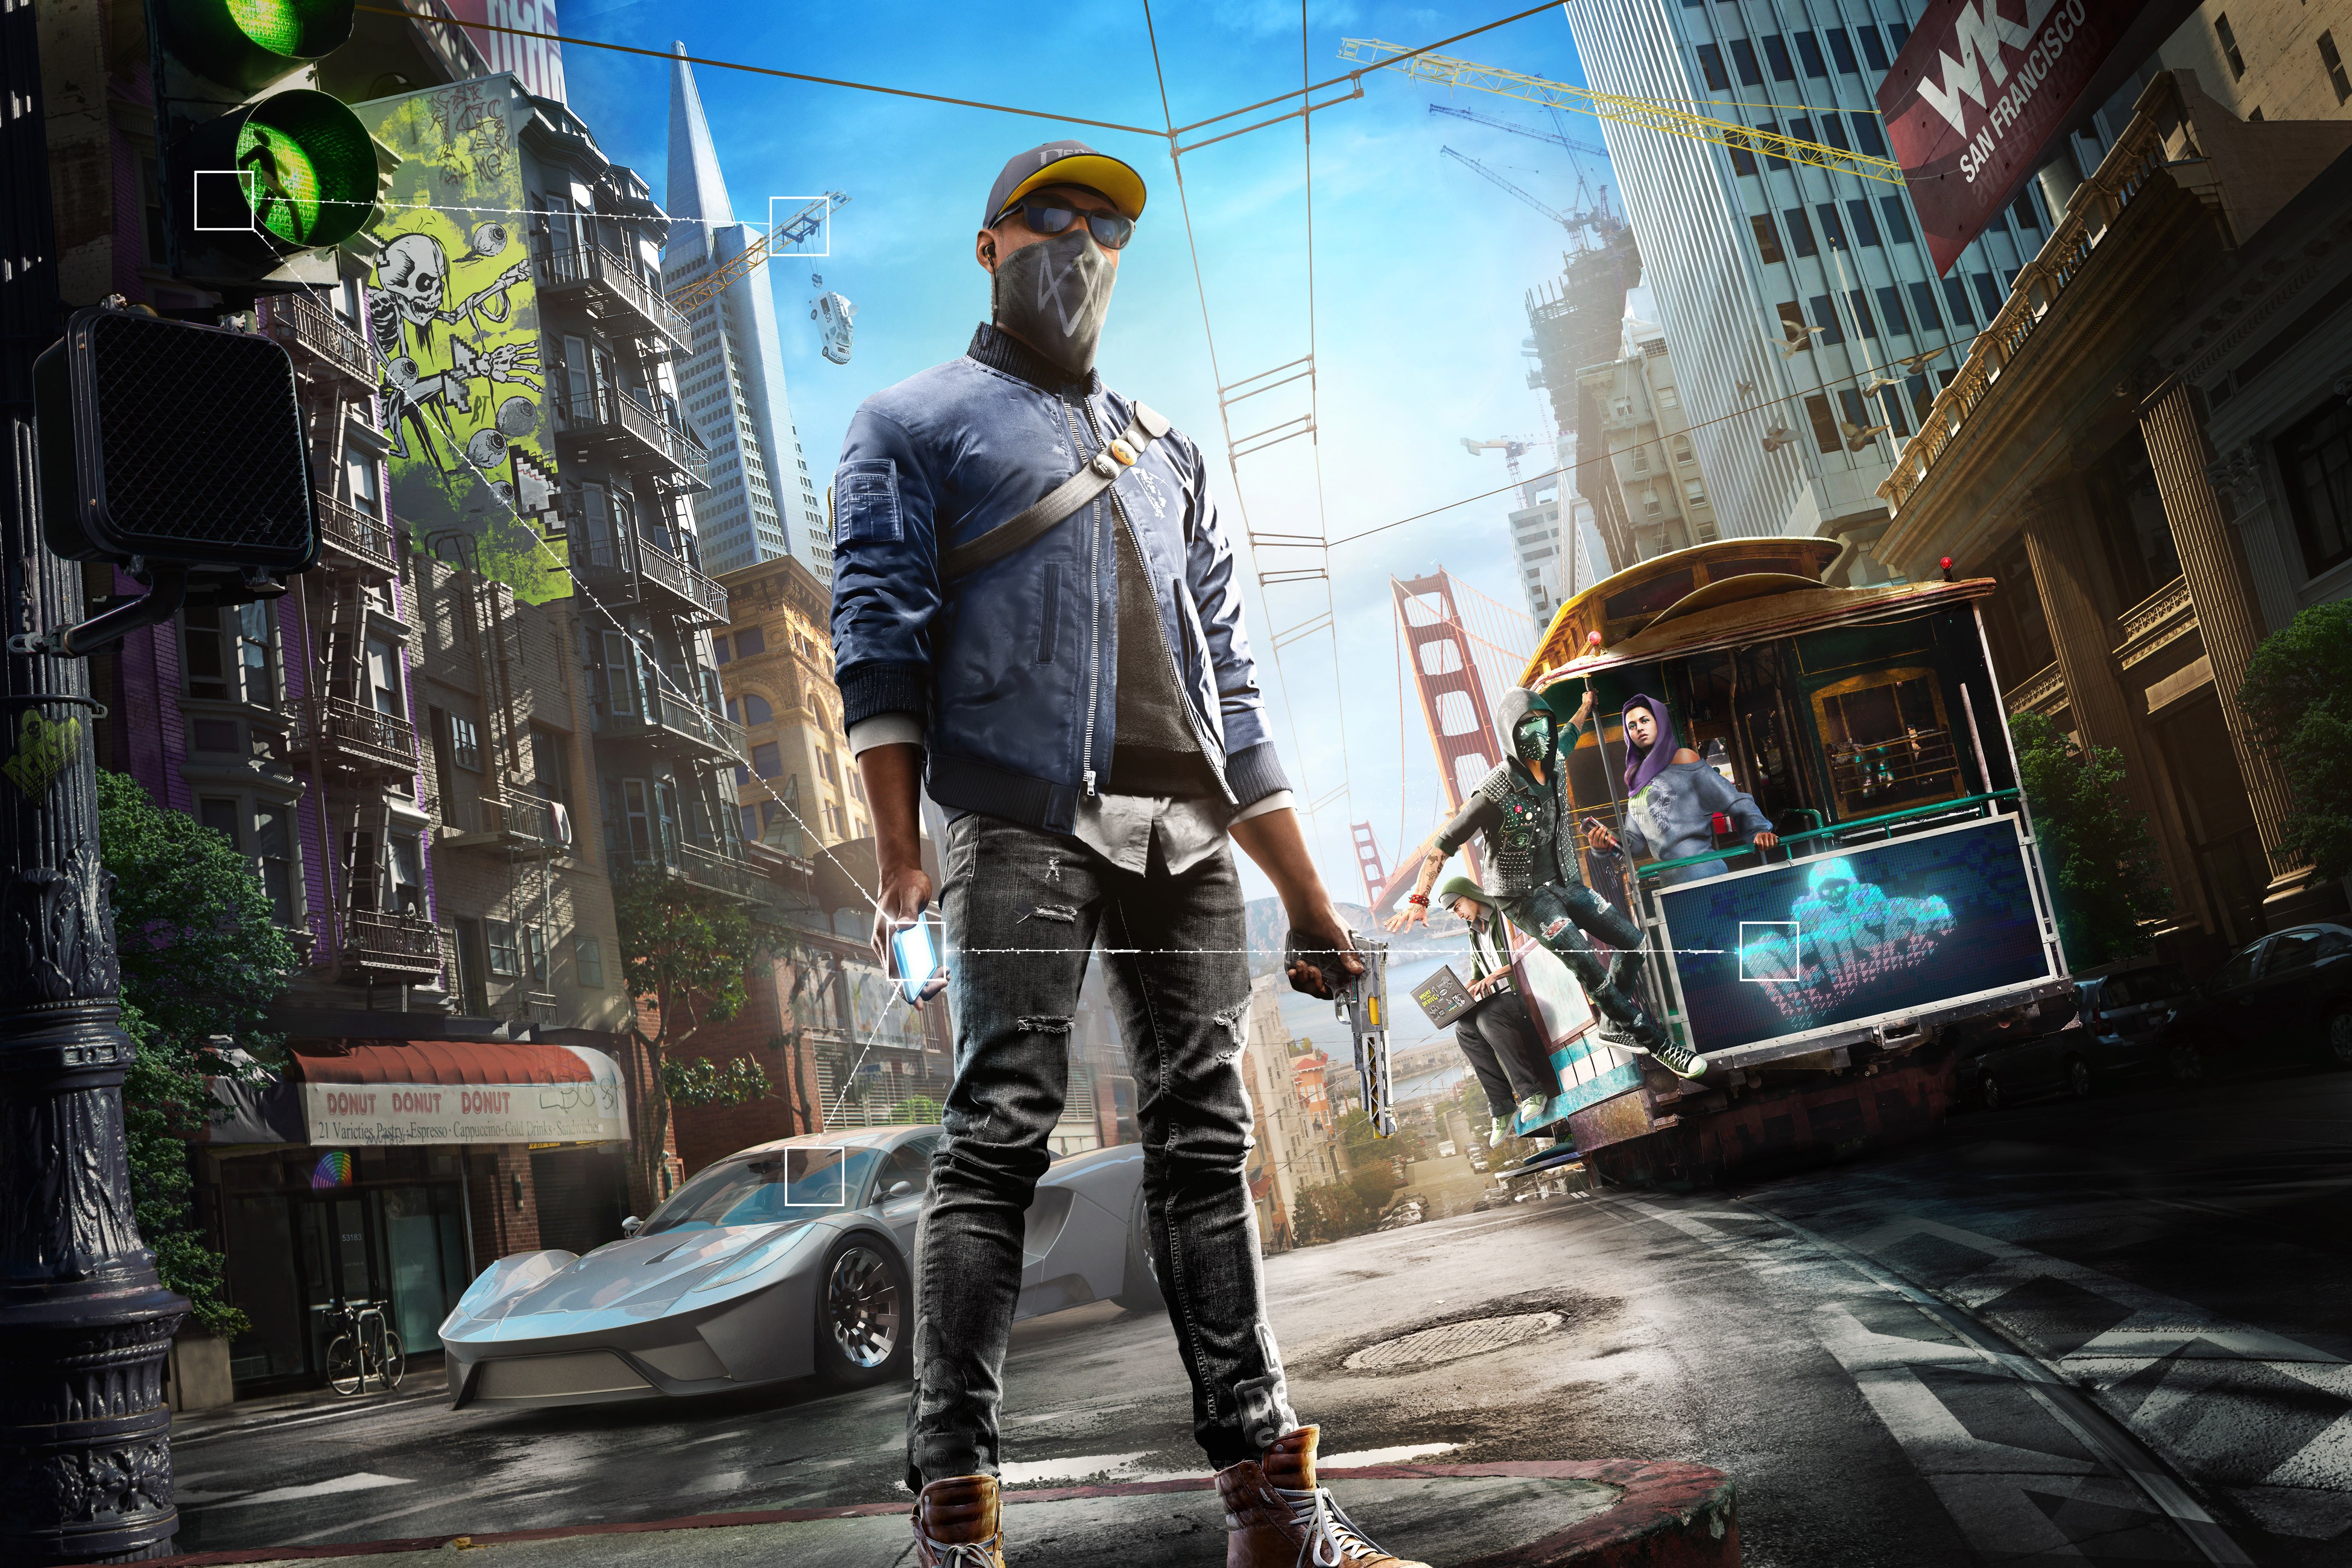 watch dogs 2 download pc